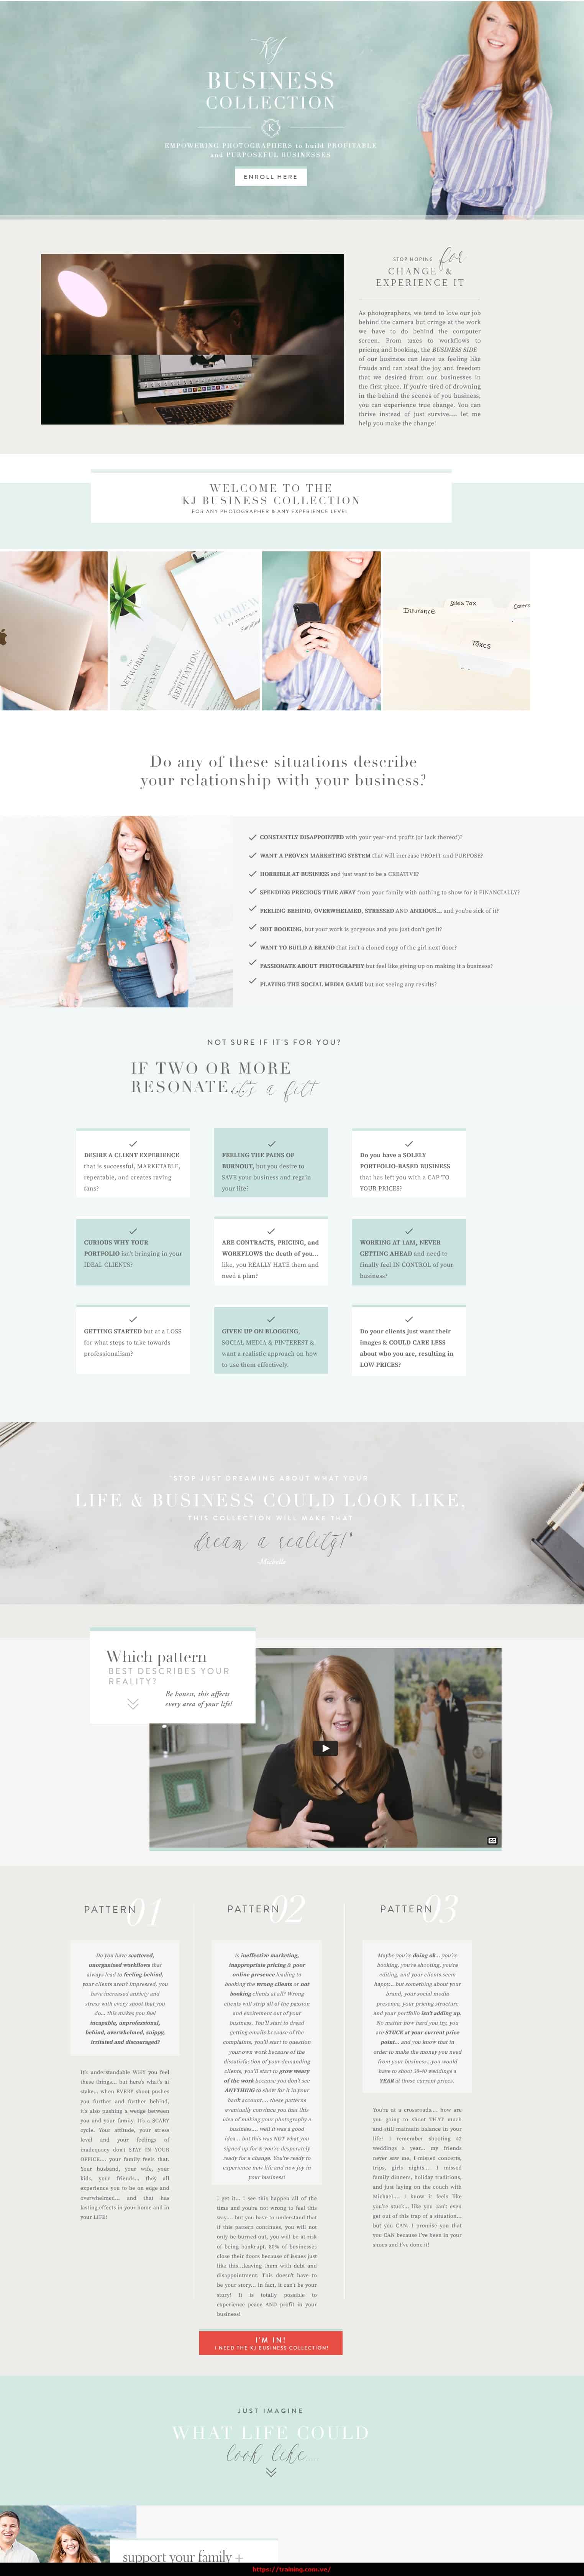 KJ Business Collection by Katelyn James Sales page